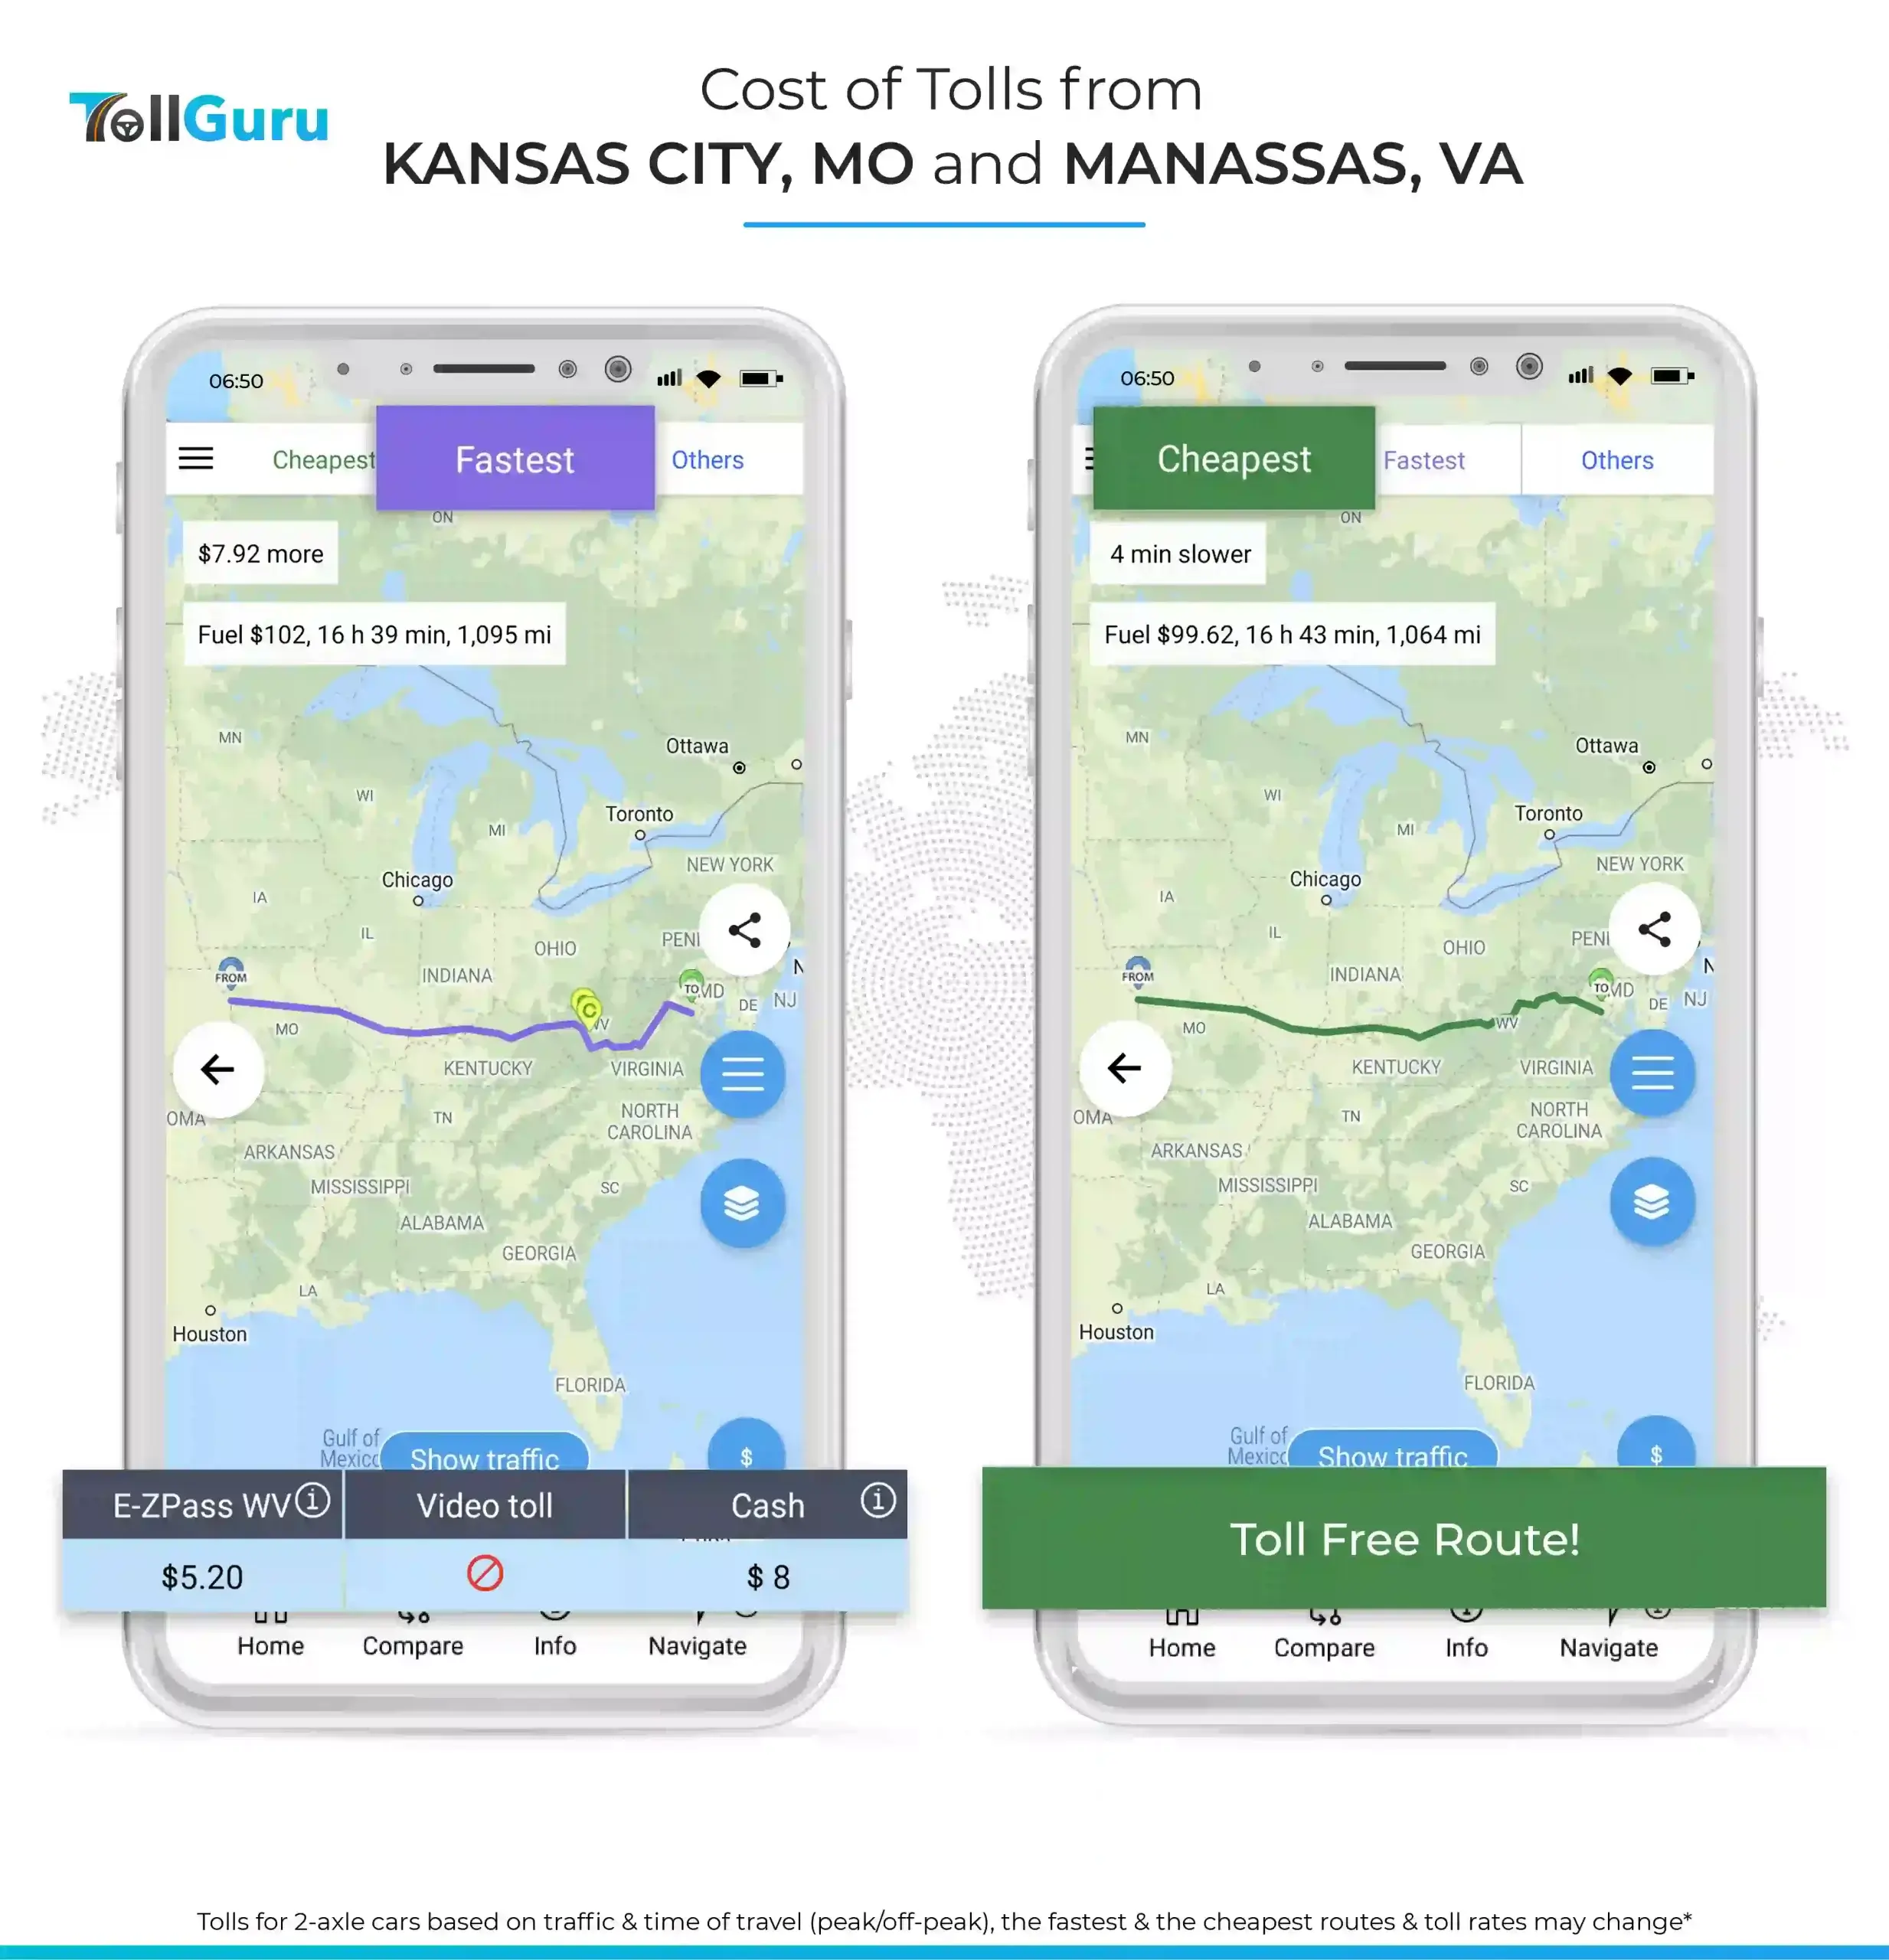 TollGuru shows the cheapest route to travel from Kansas to Manassas is toll-free while the fastest costs $5.20 for a car.